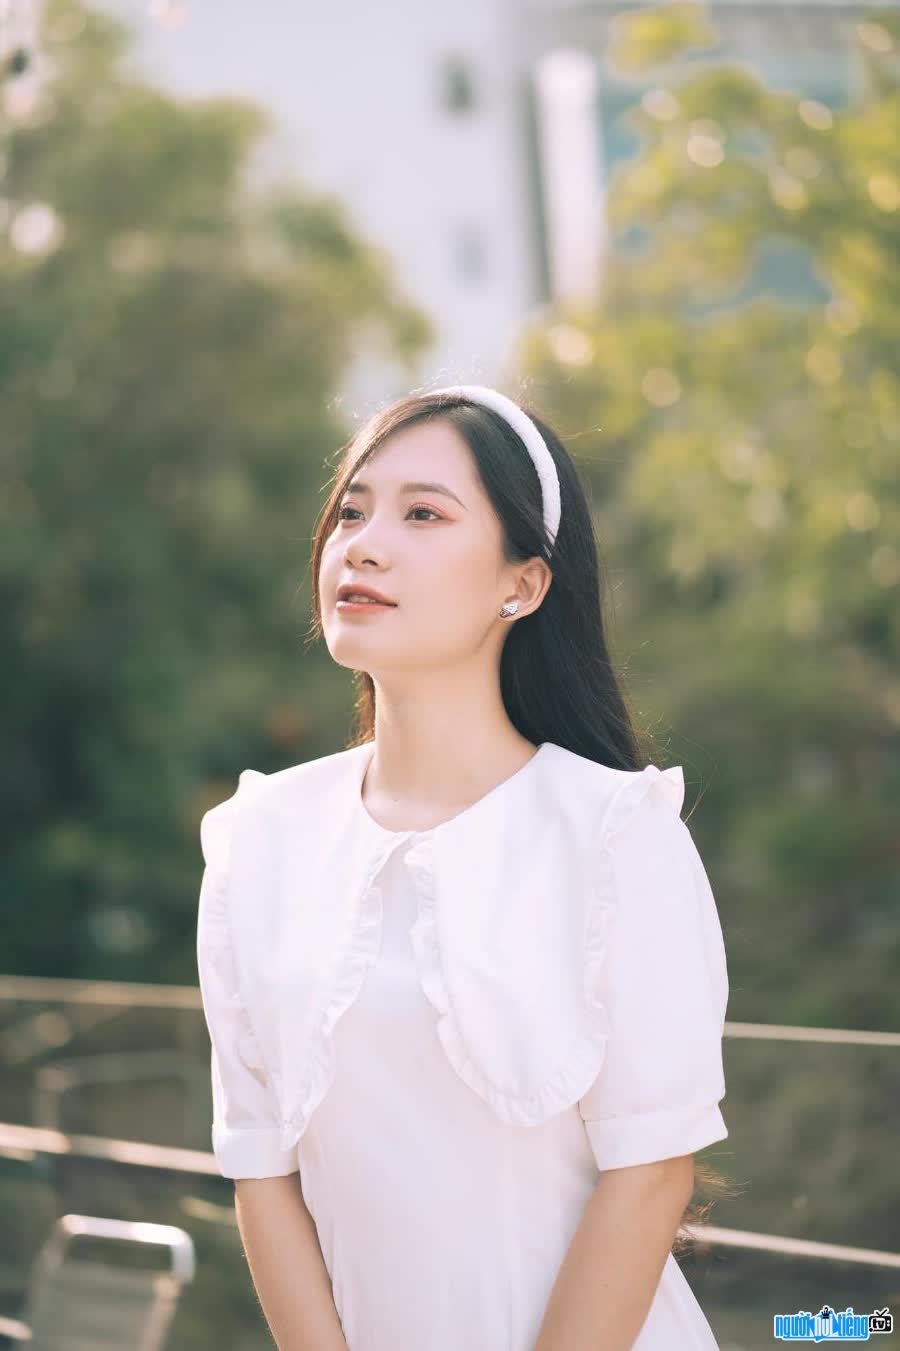 Anh Chi wishes to spread positivity to many people